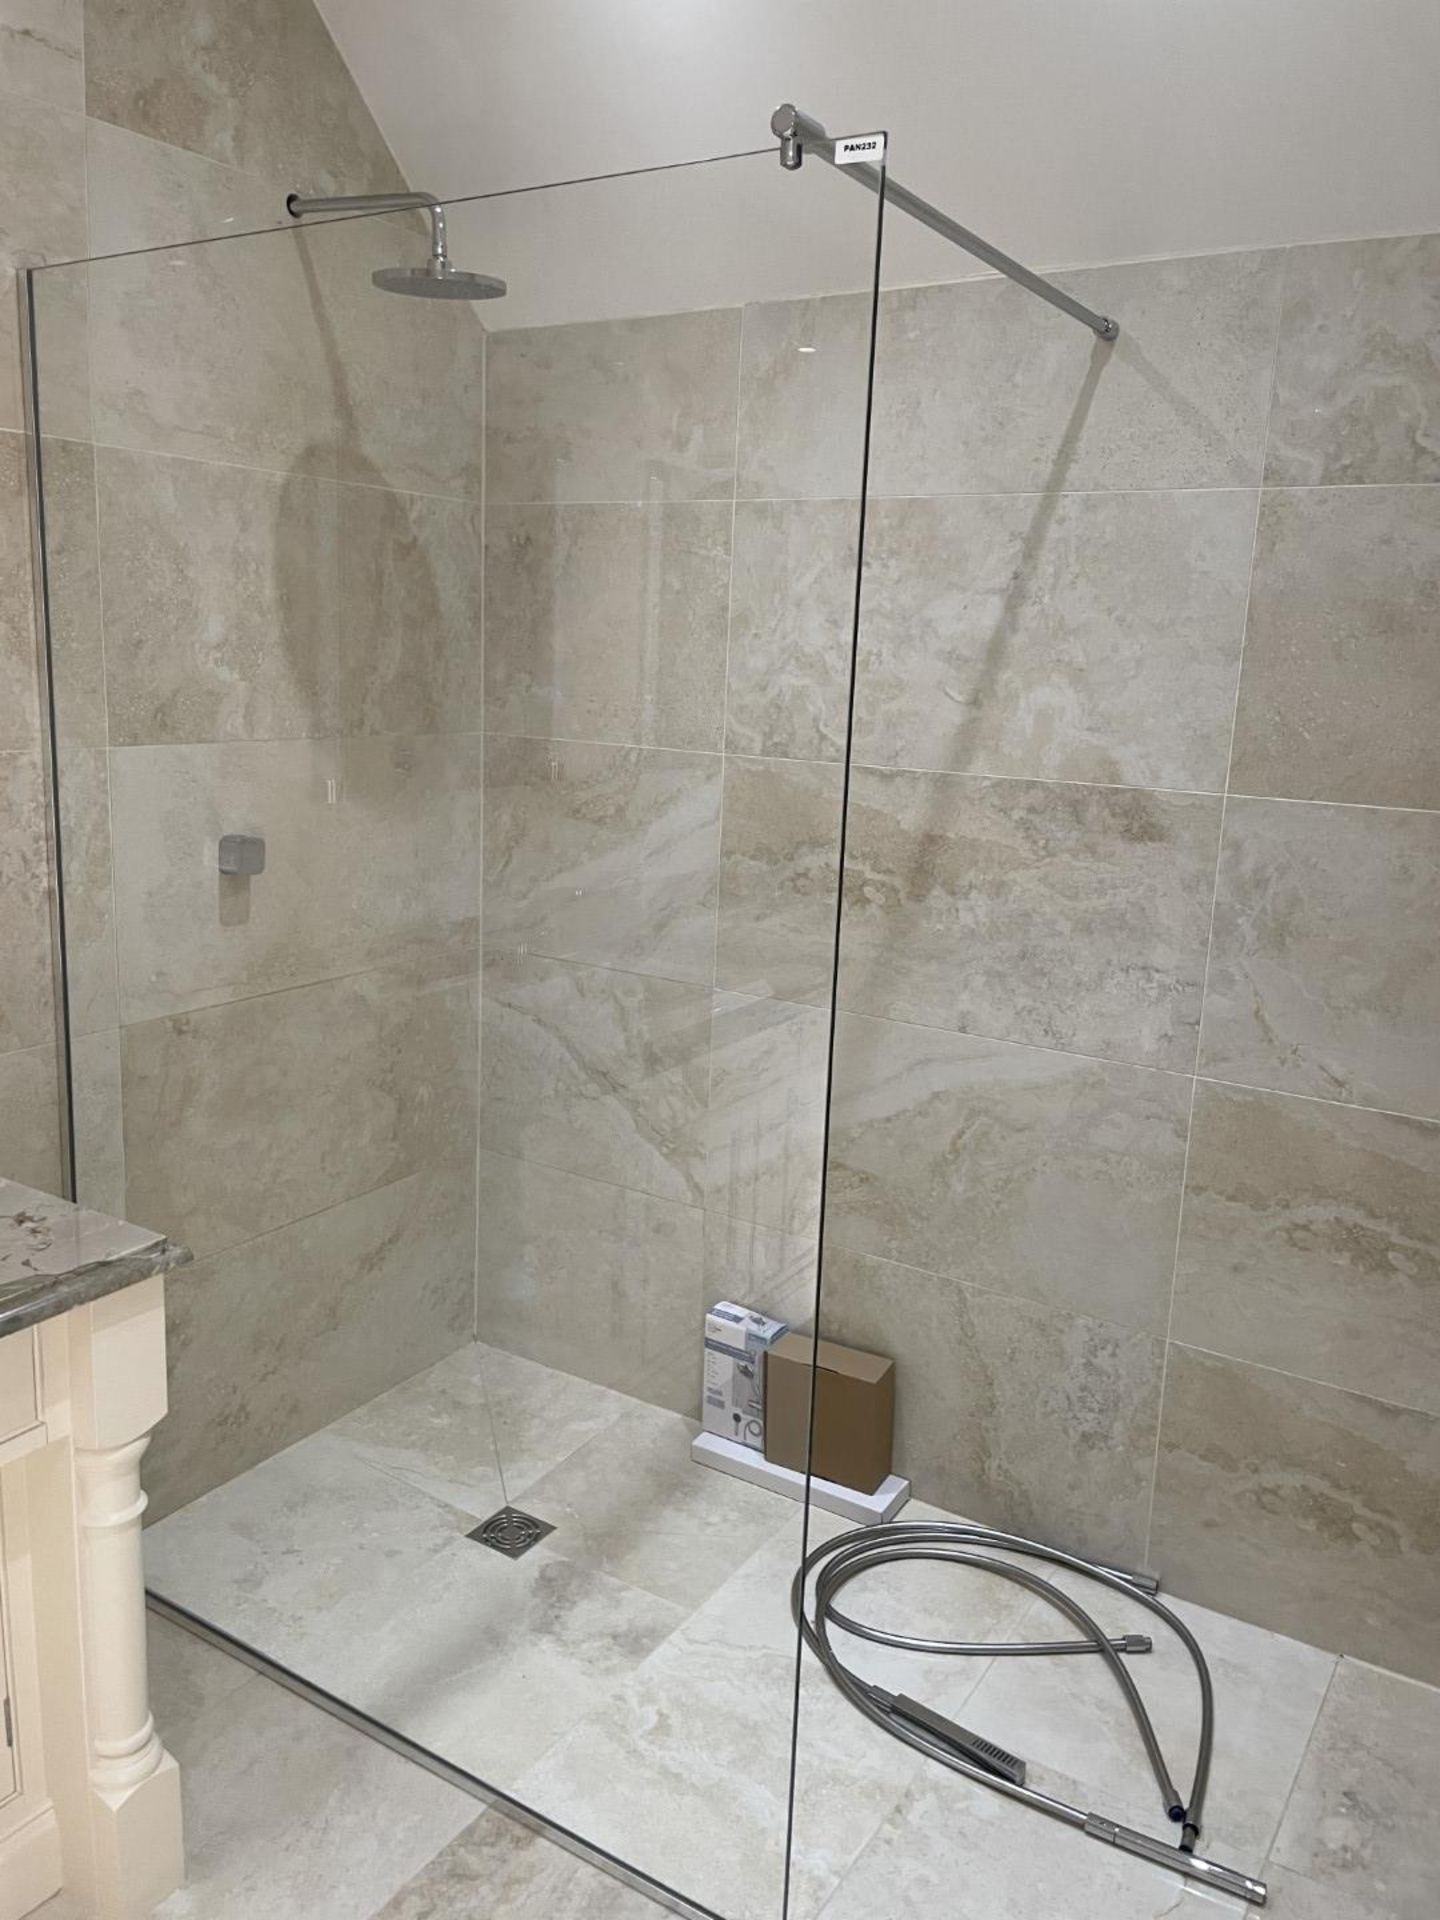 1 x Premium Shower and Enclosure + Hansgrove Controls and Thermostat - Ref: PAN232 - CL896 - NO - Image 2 of 21